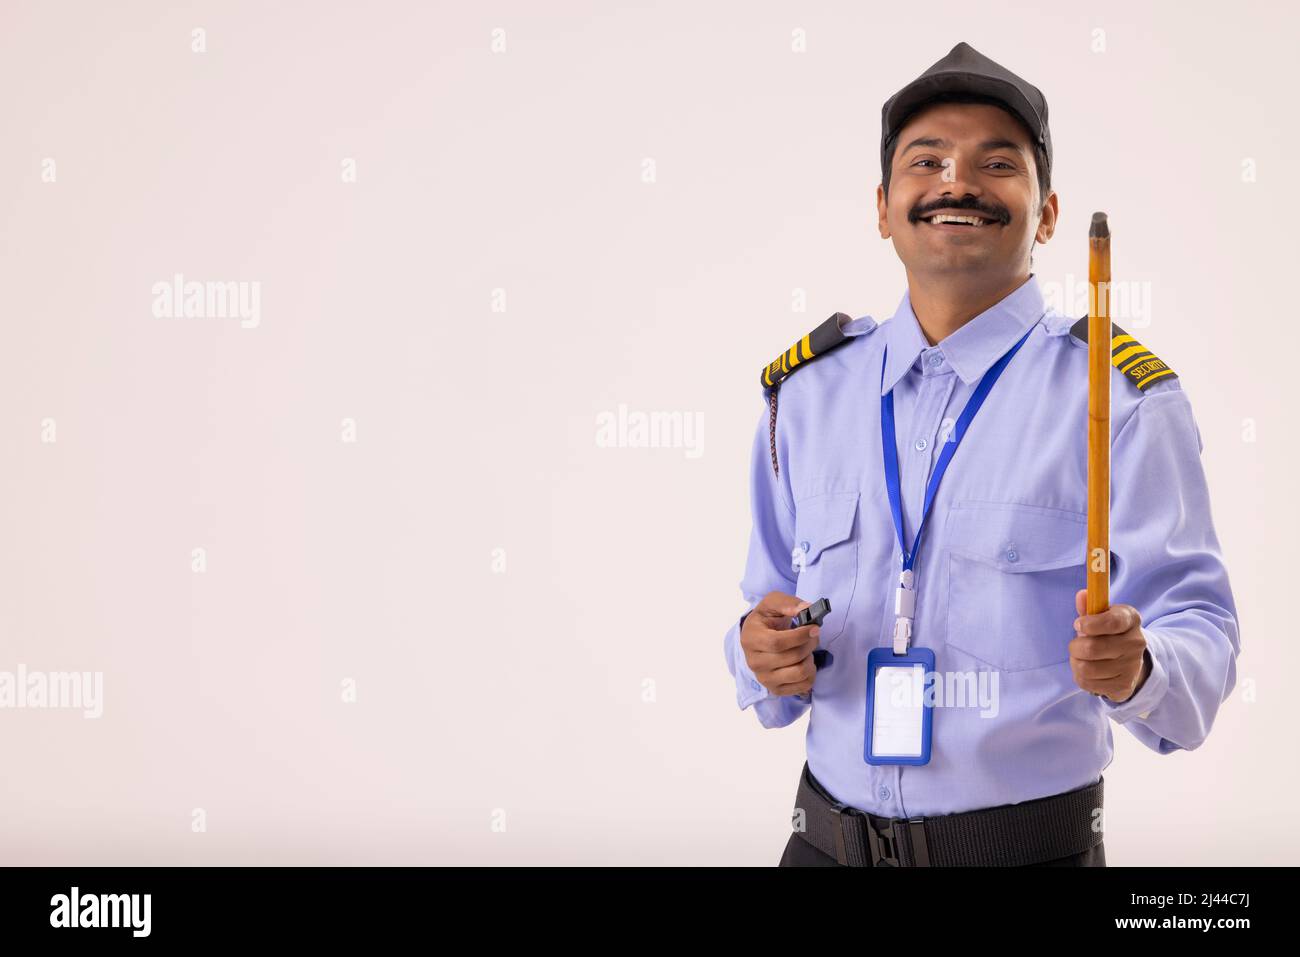 Portrait of Security guard with whistle and stick in his hands Stock Photo